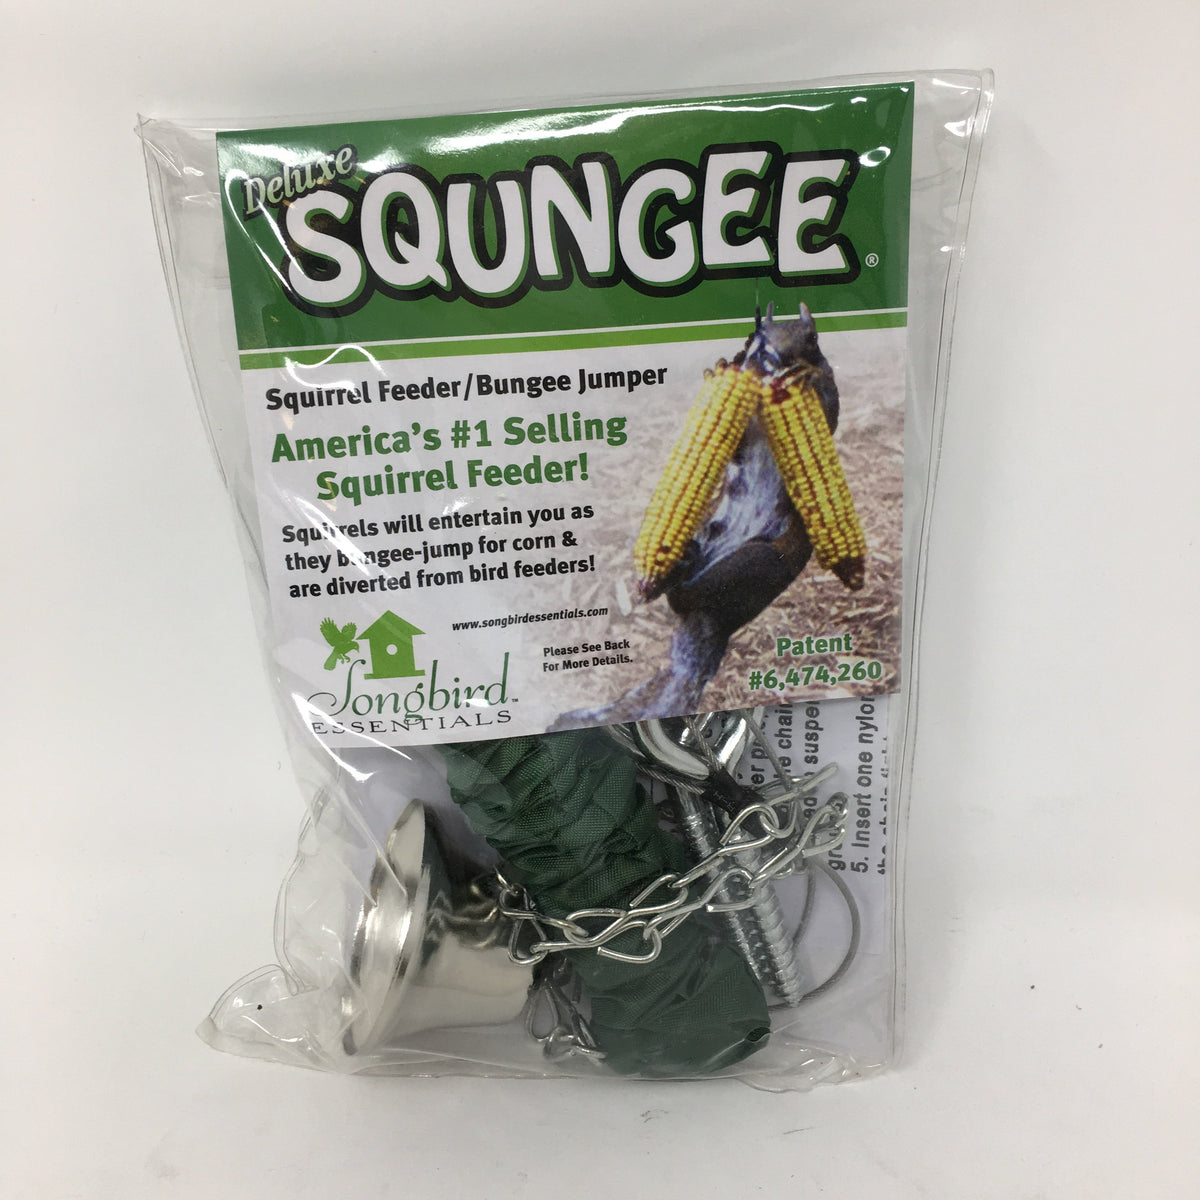 Deluxe Squngee